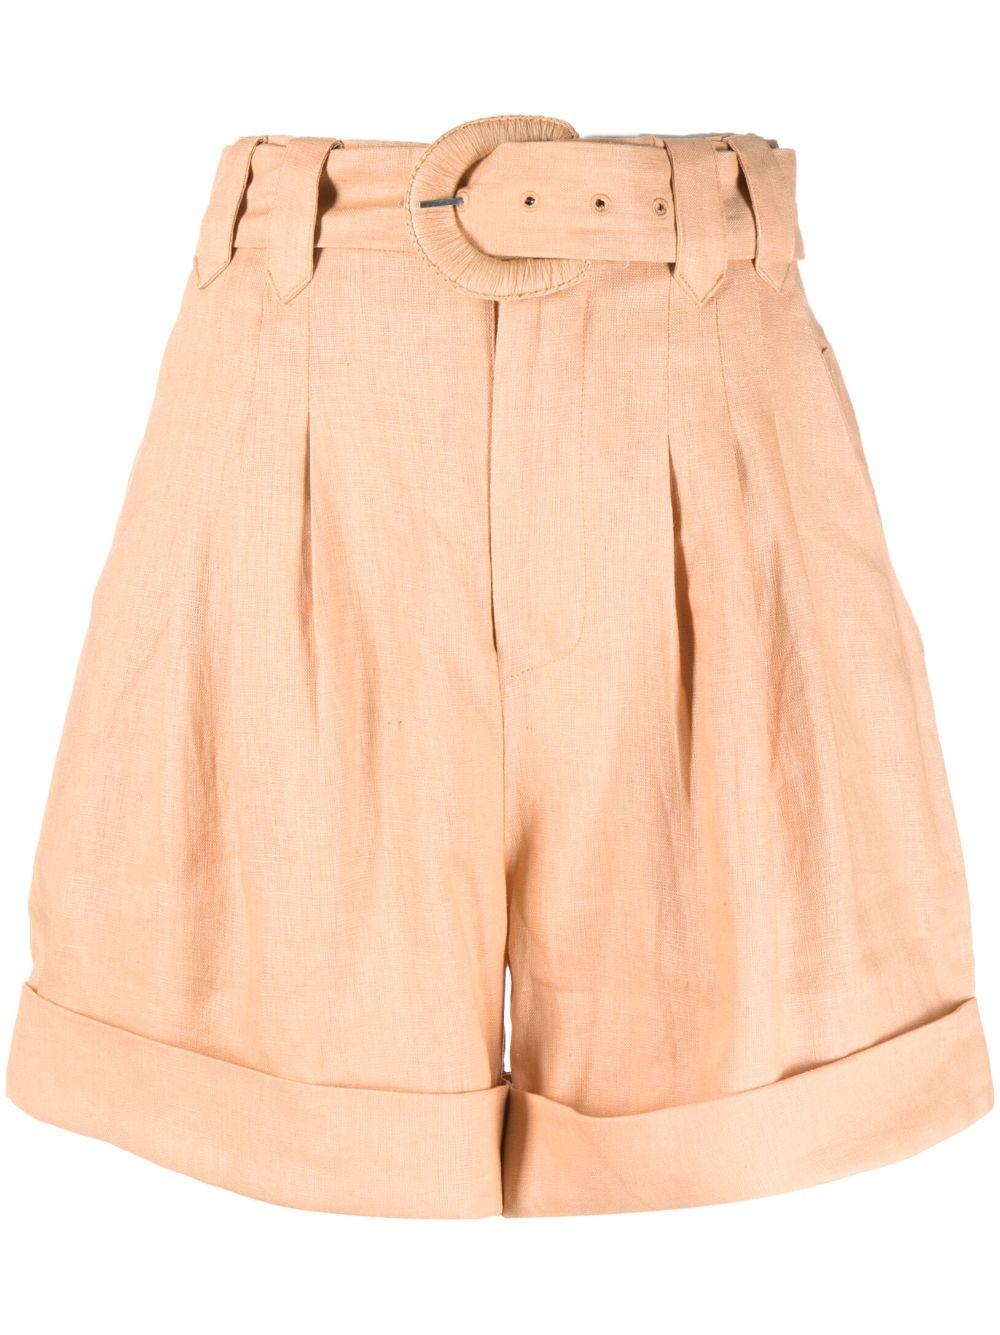 FARM Rio High-waist Belted Short Shorts in Natural | Lyst